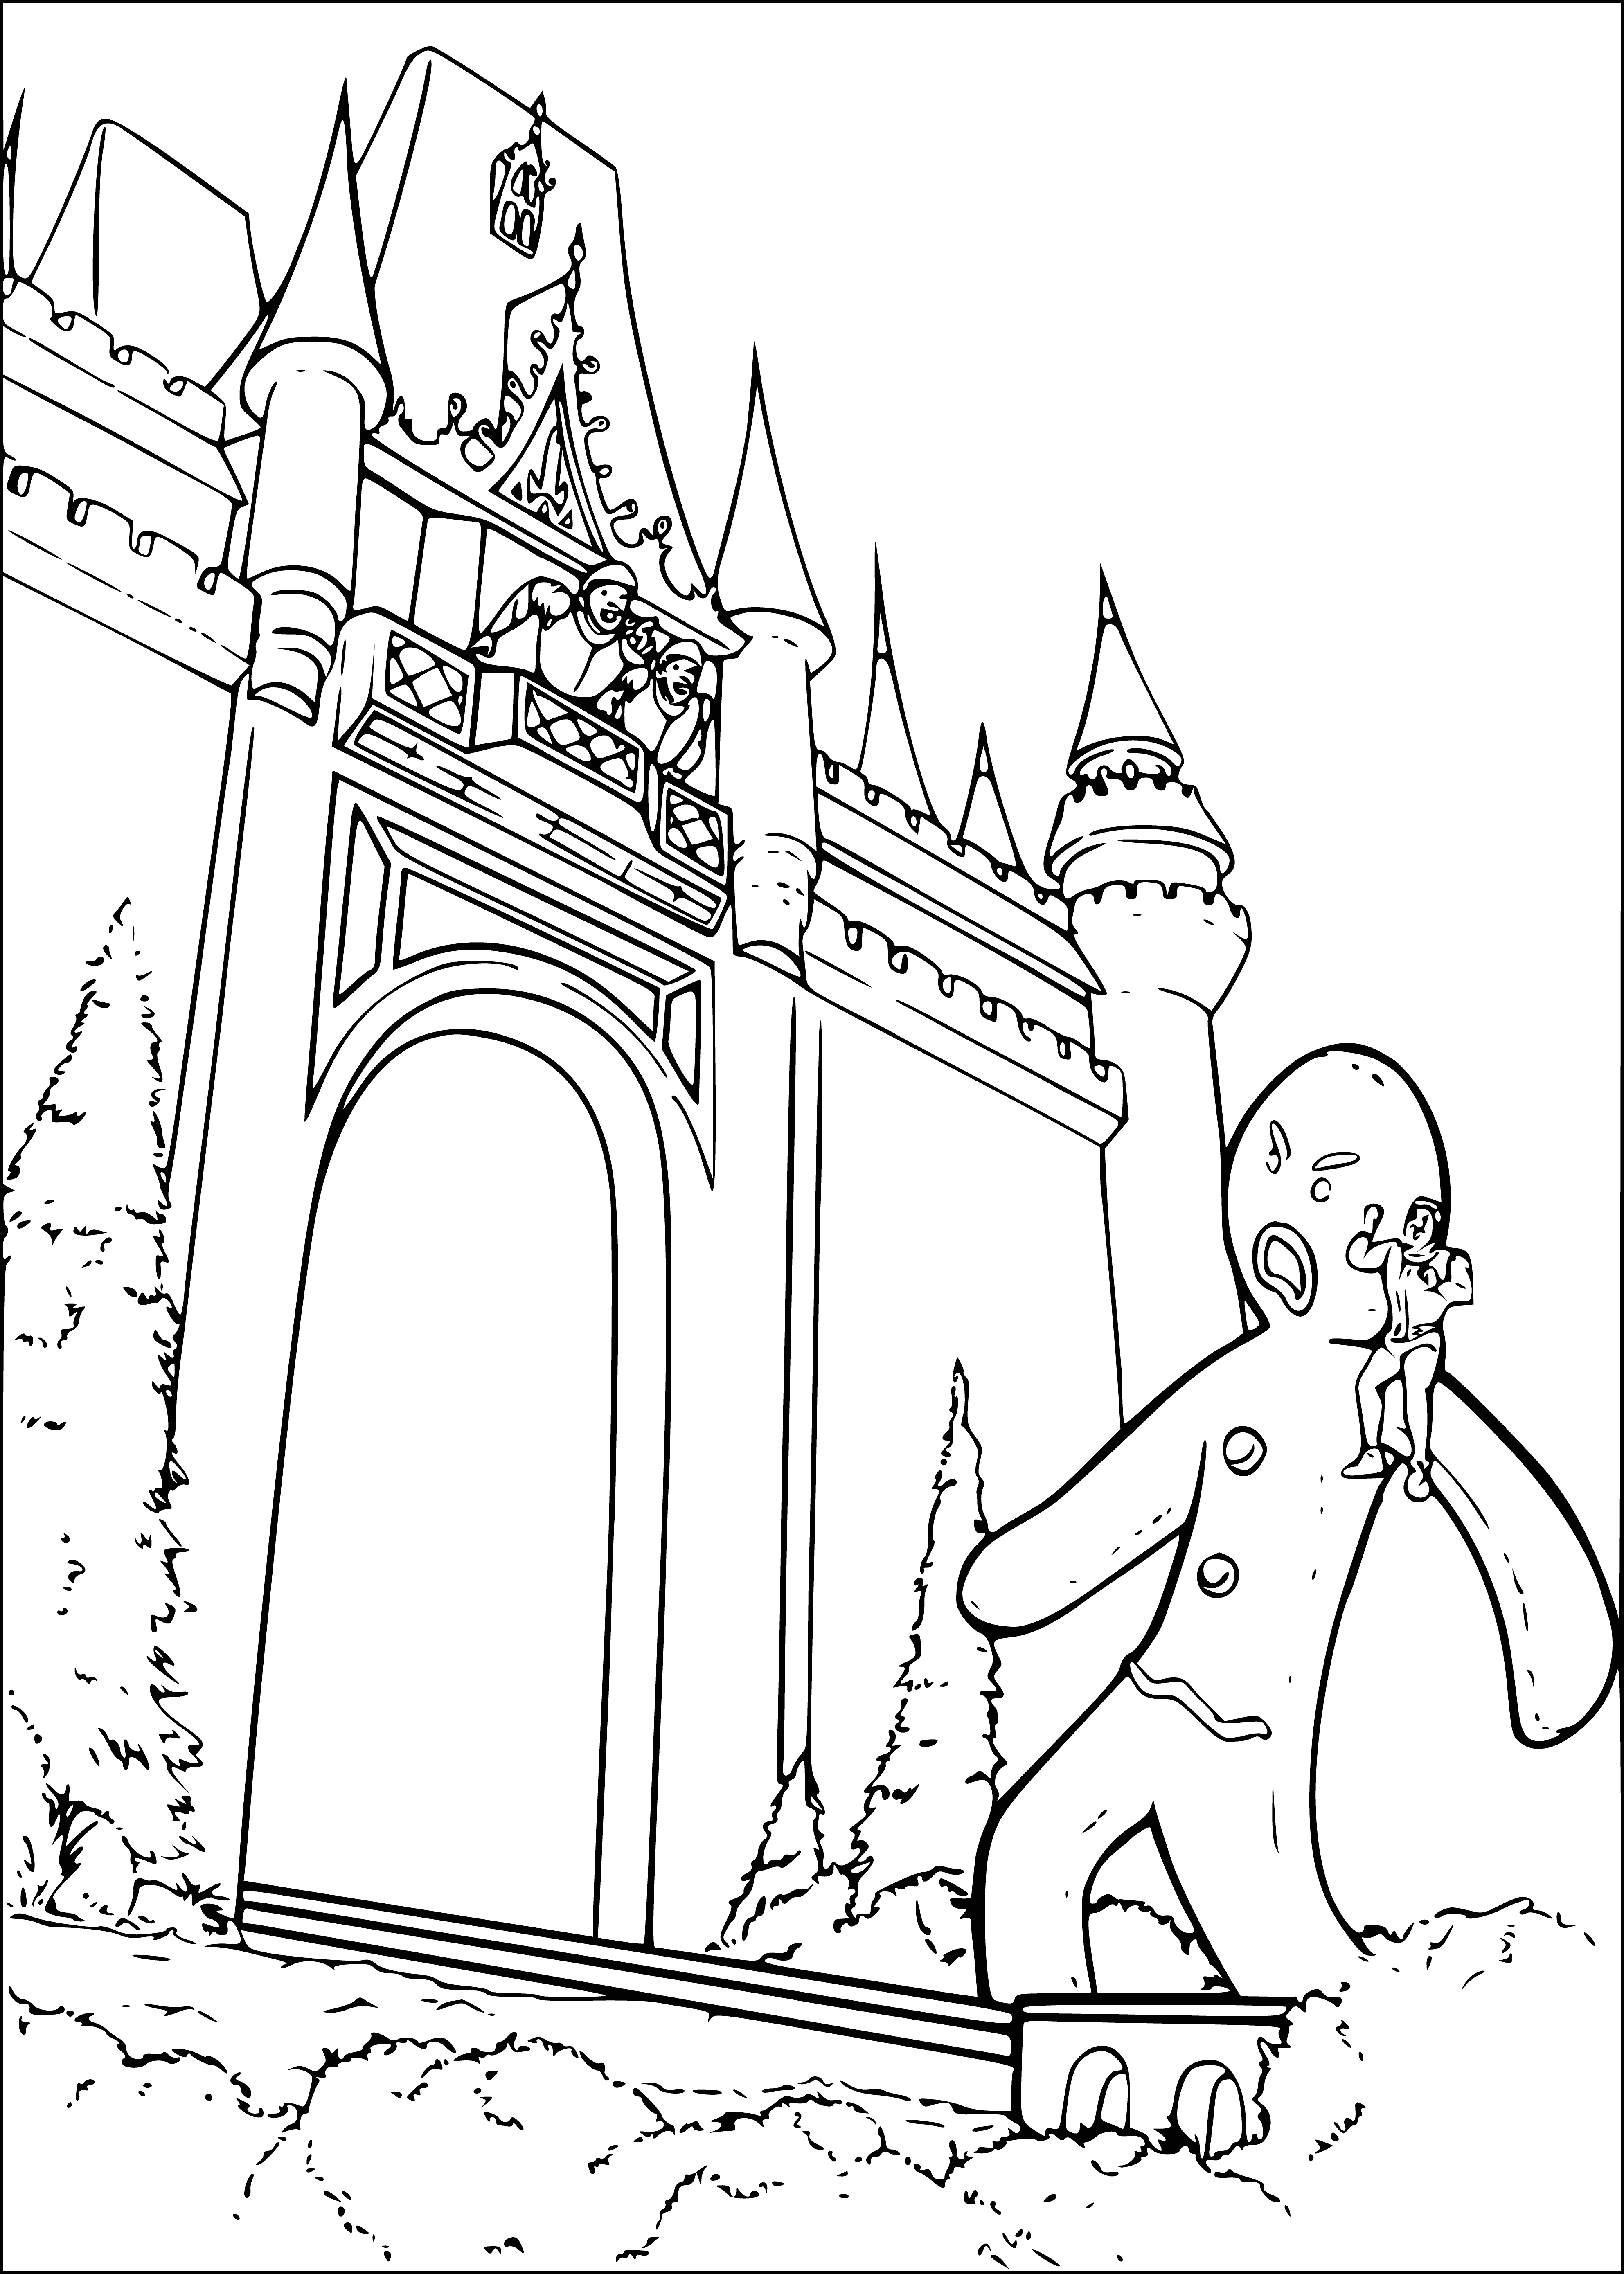 Sand man coloring page